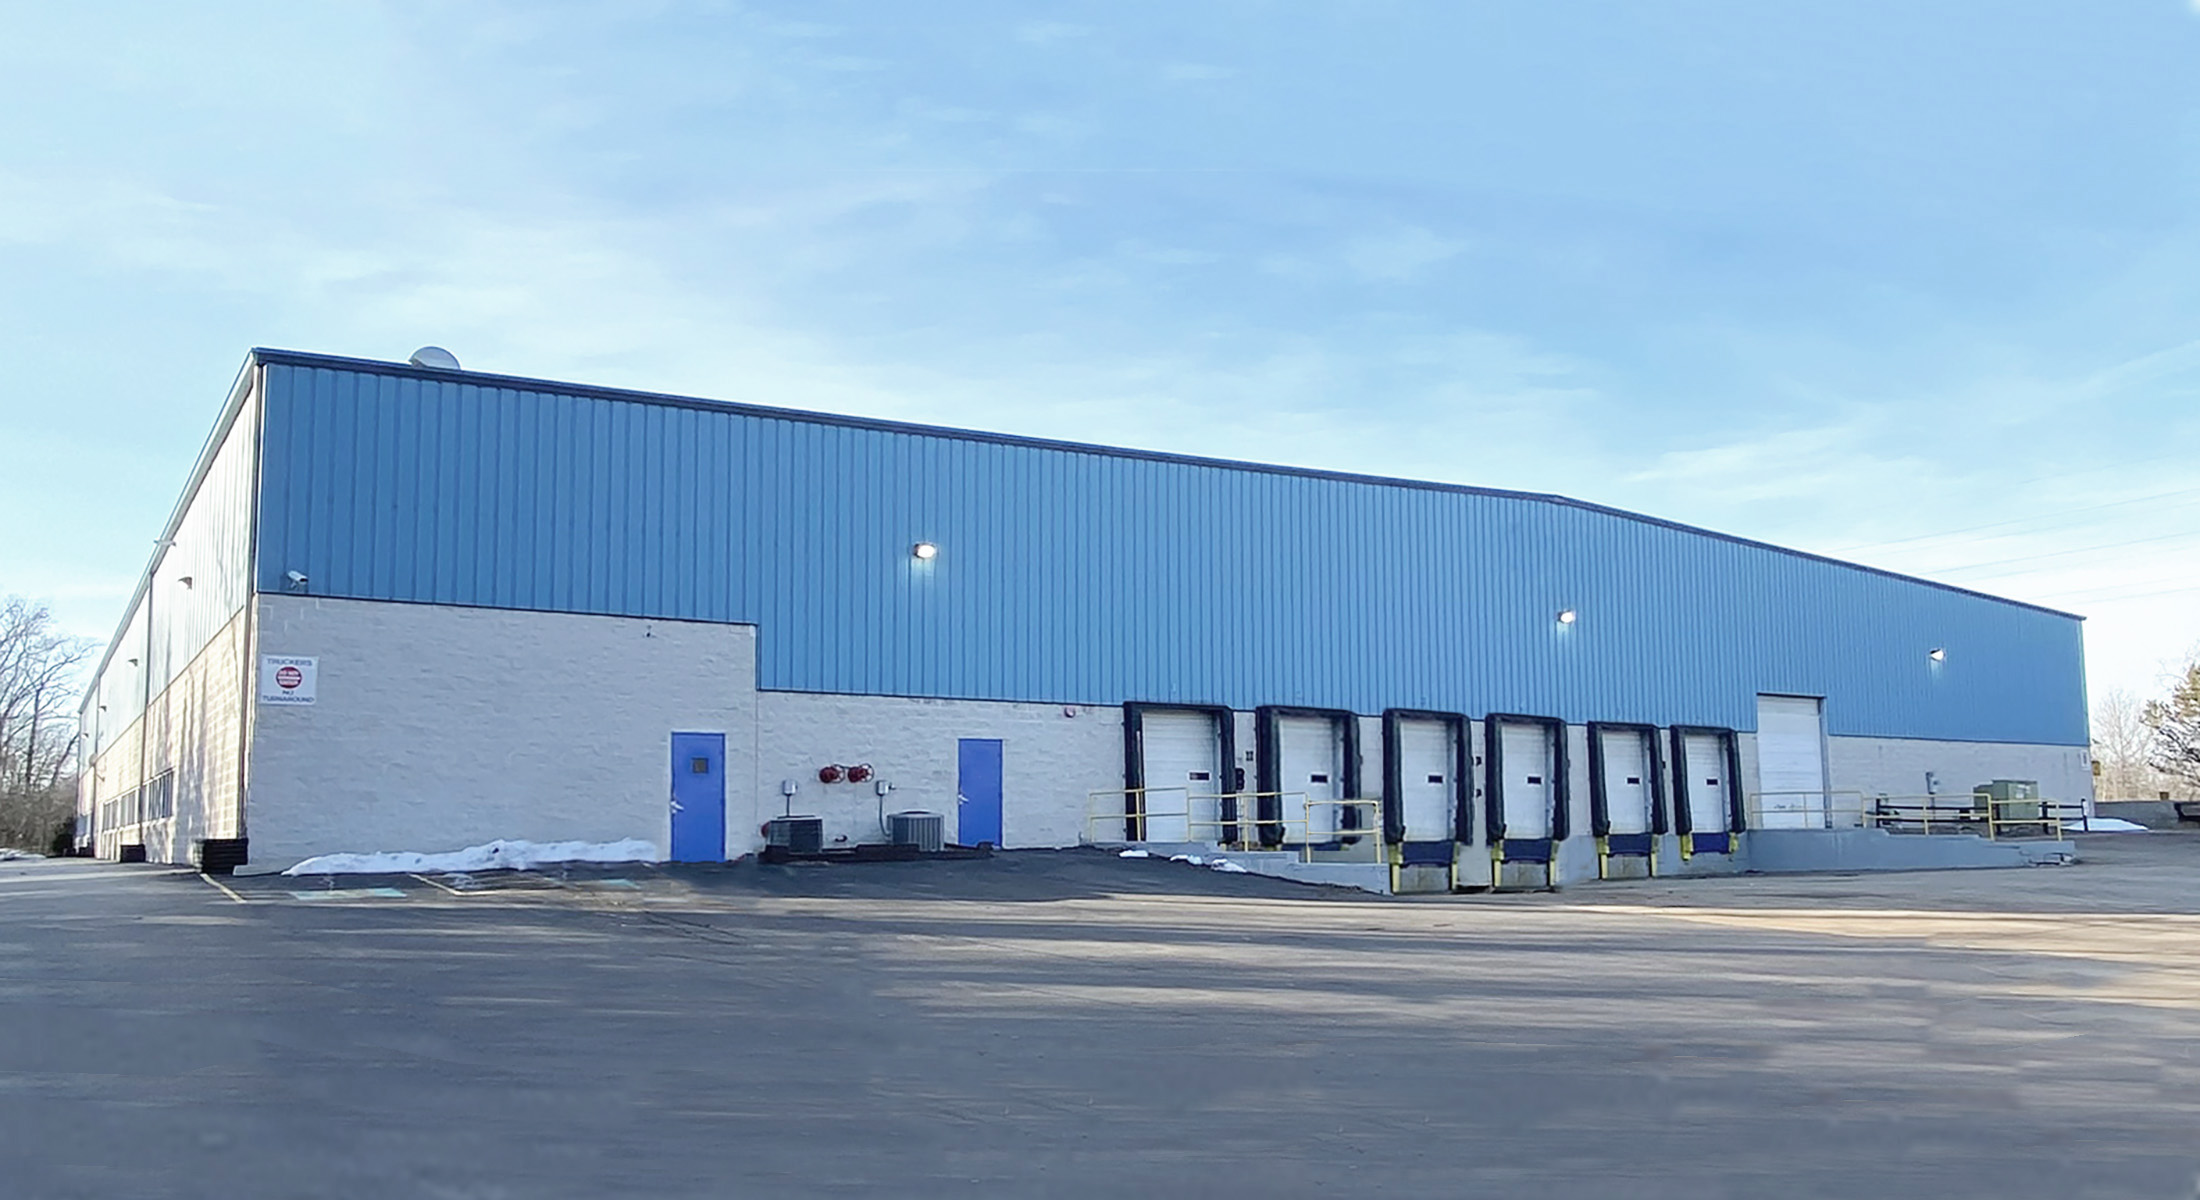 Exterior Of DF Supply, Inc. Facility In Twinsburg Ohio